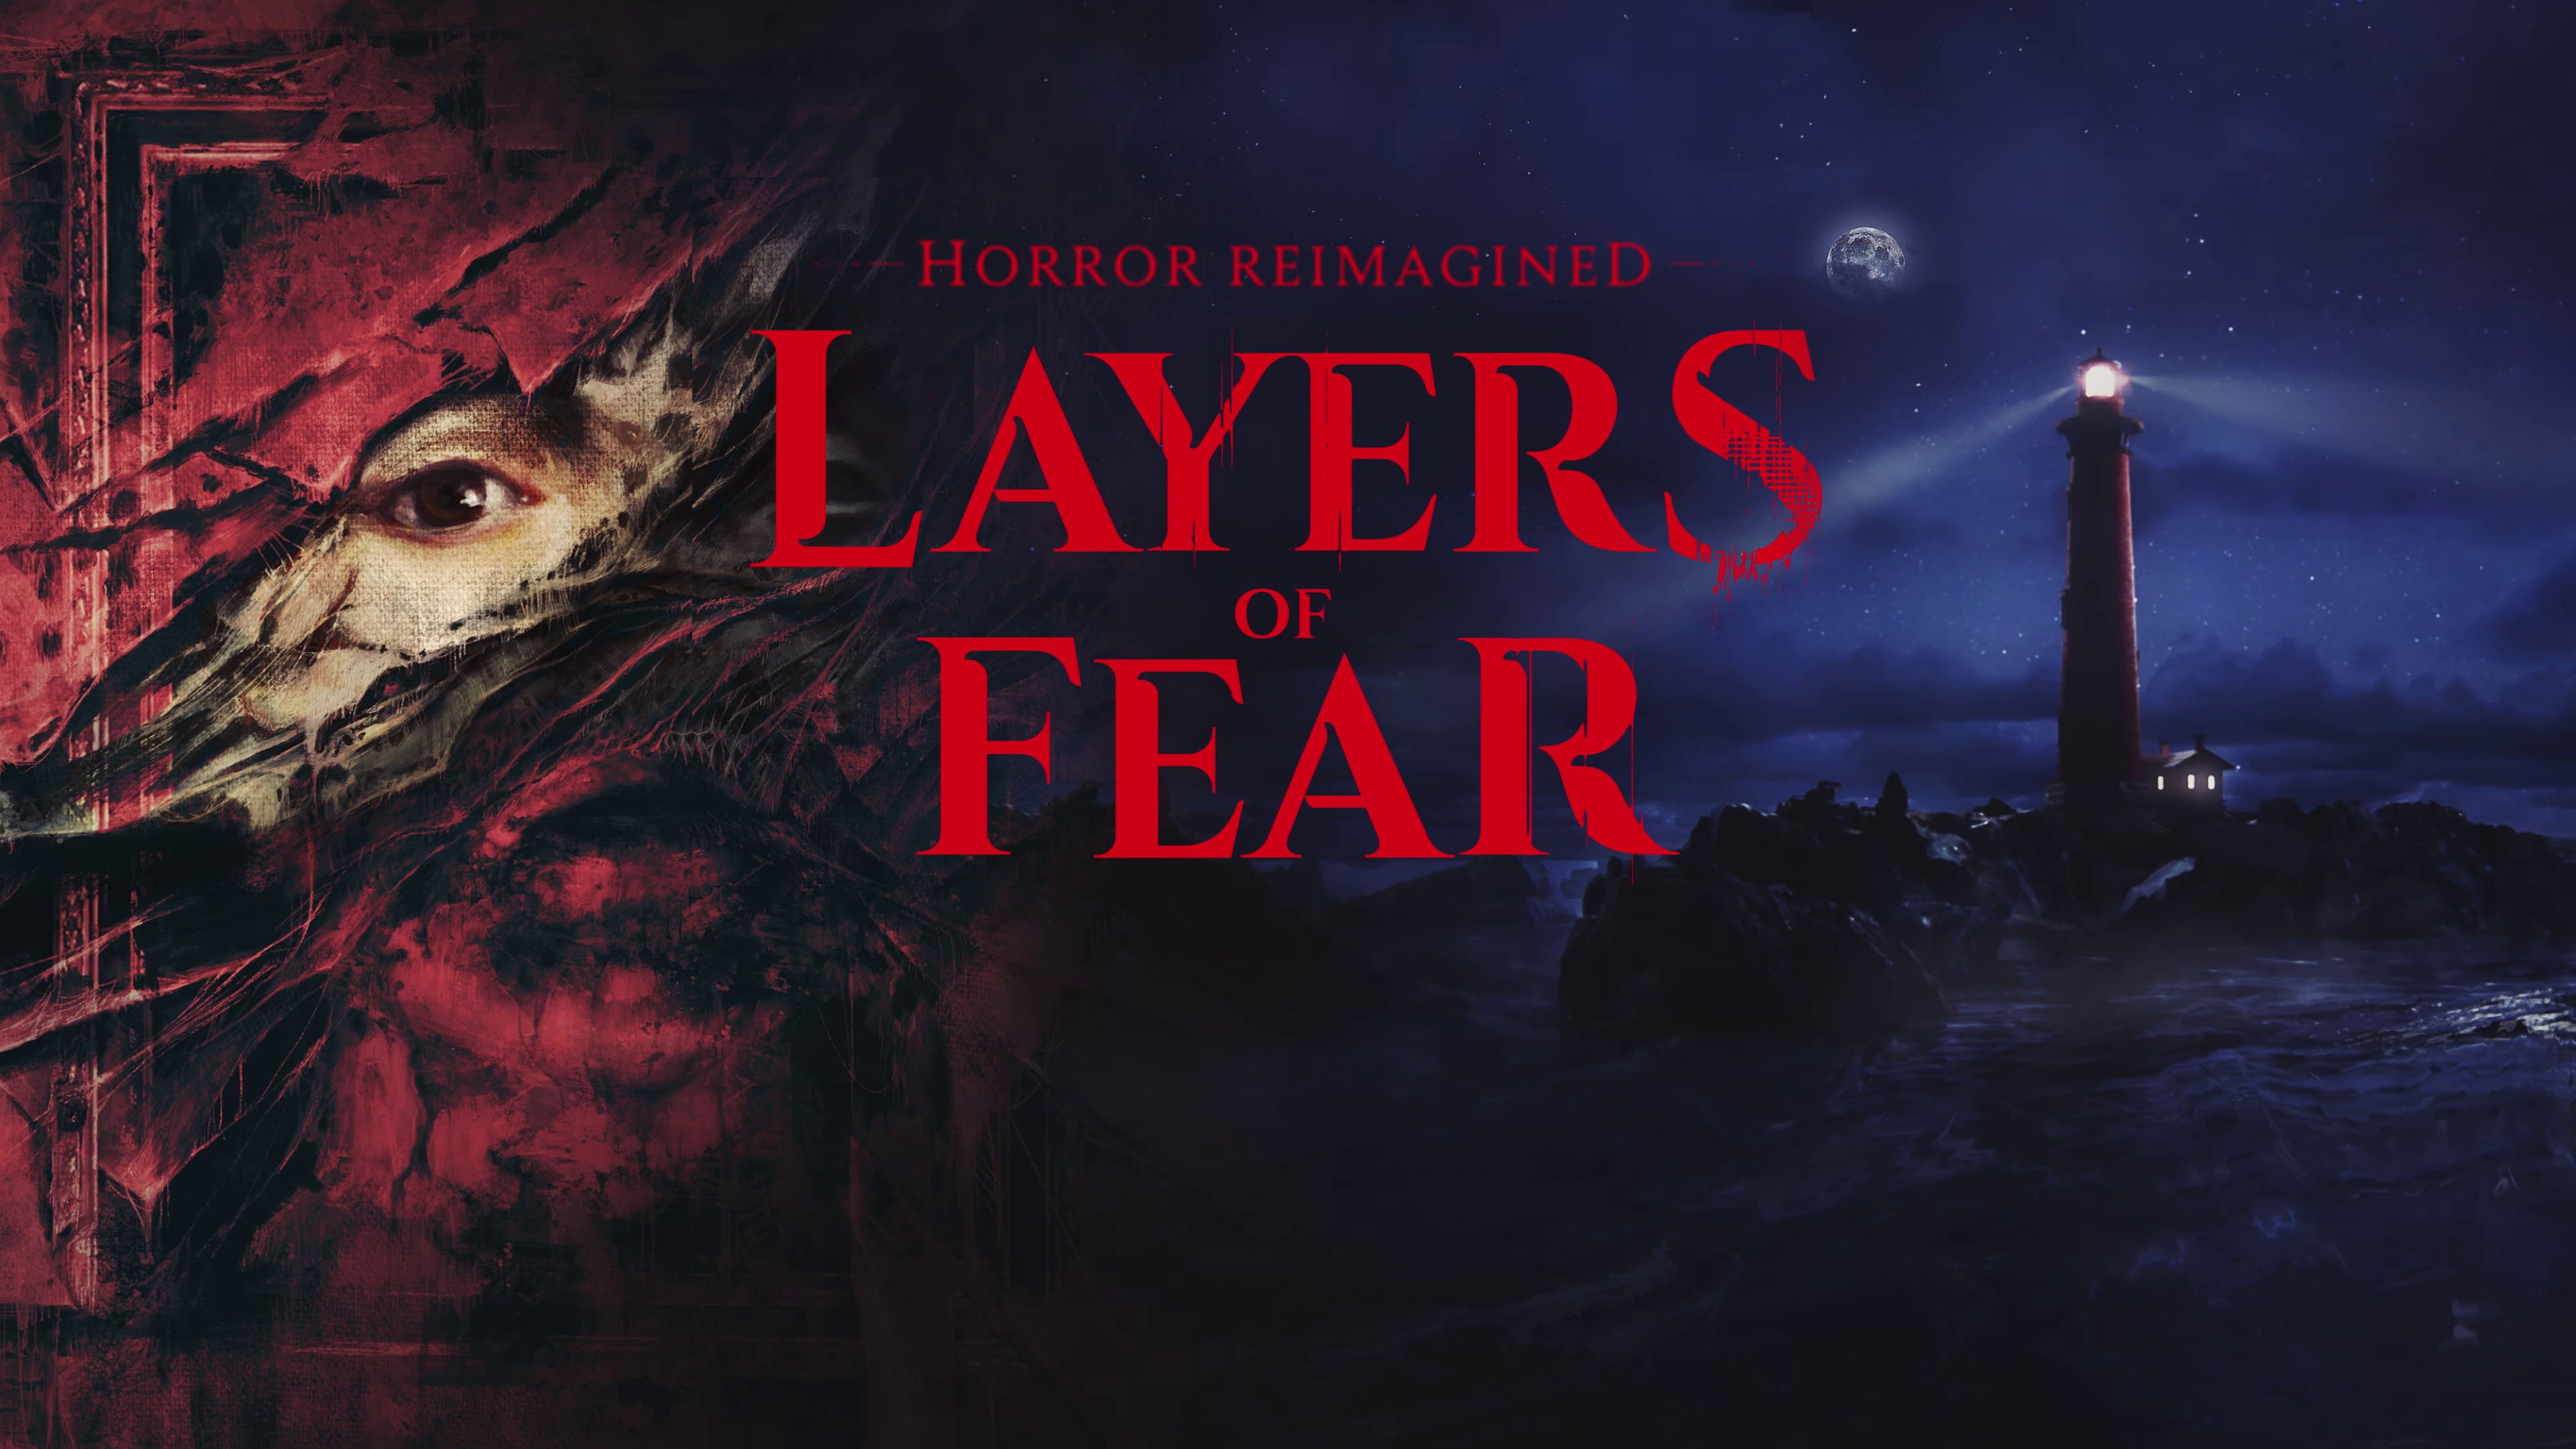 Layers of Fears is coming early 2023